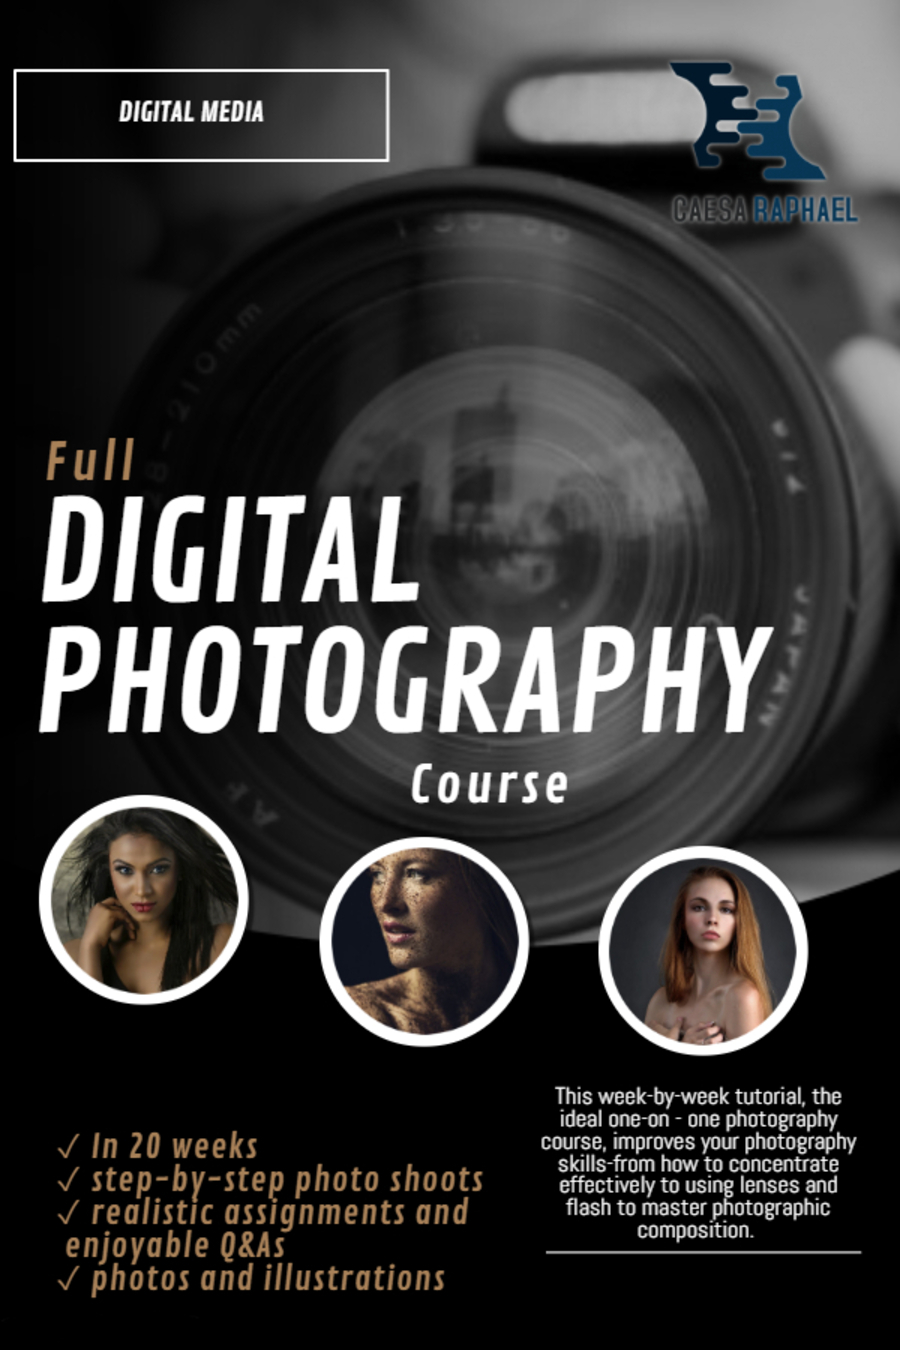 Full Digital Photography Course Learn what you need to know in 20 Weeks - photo 1